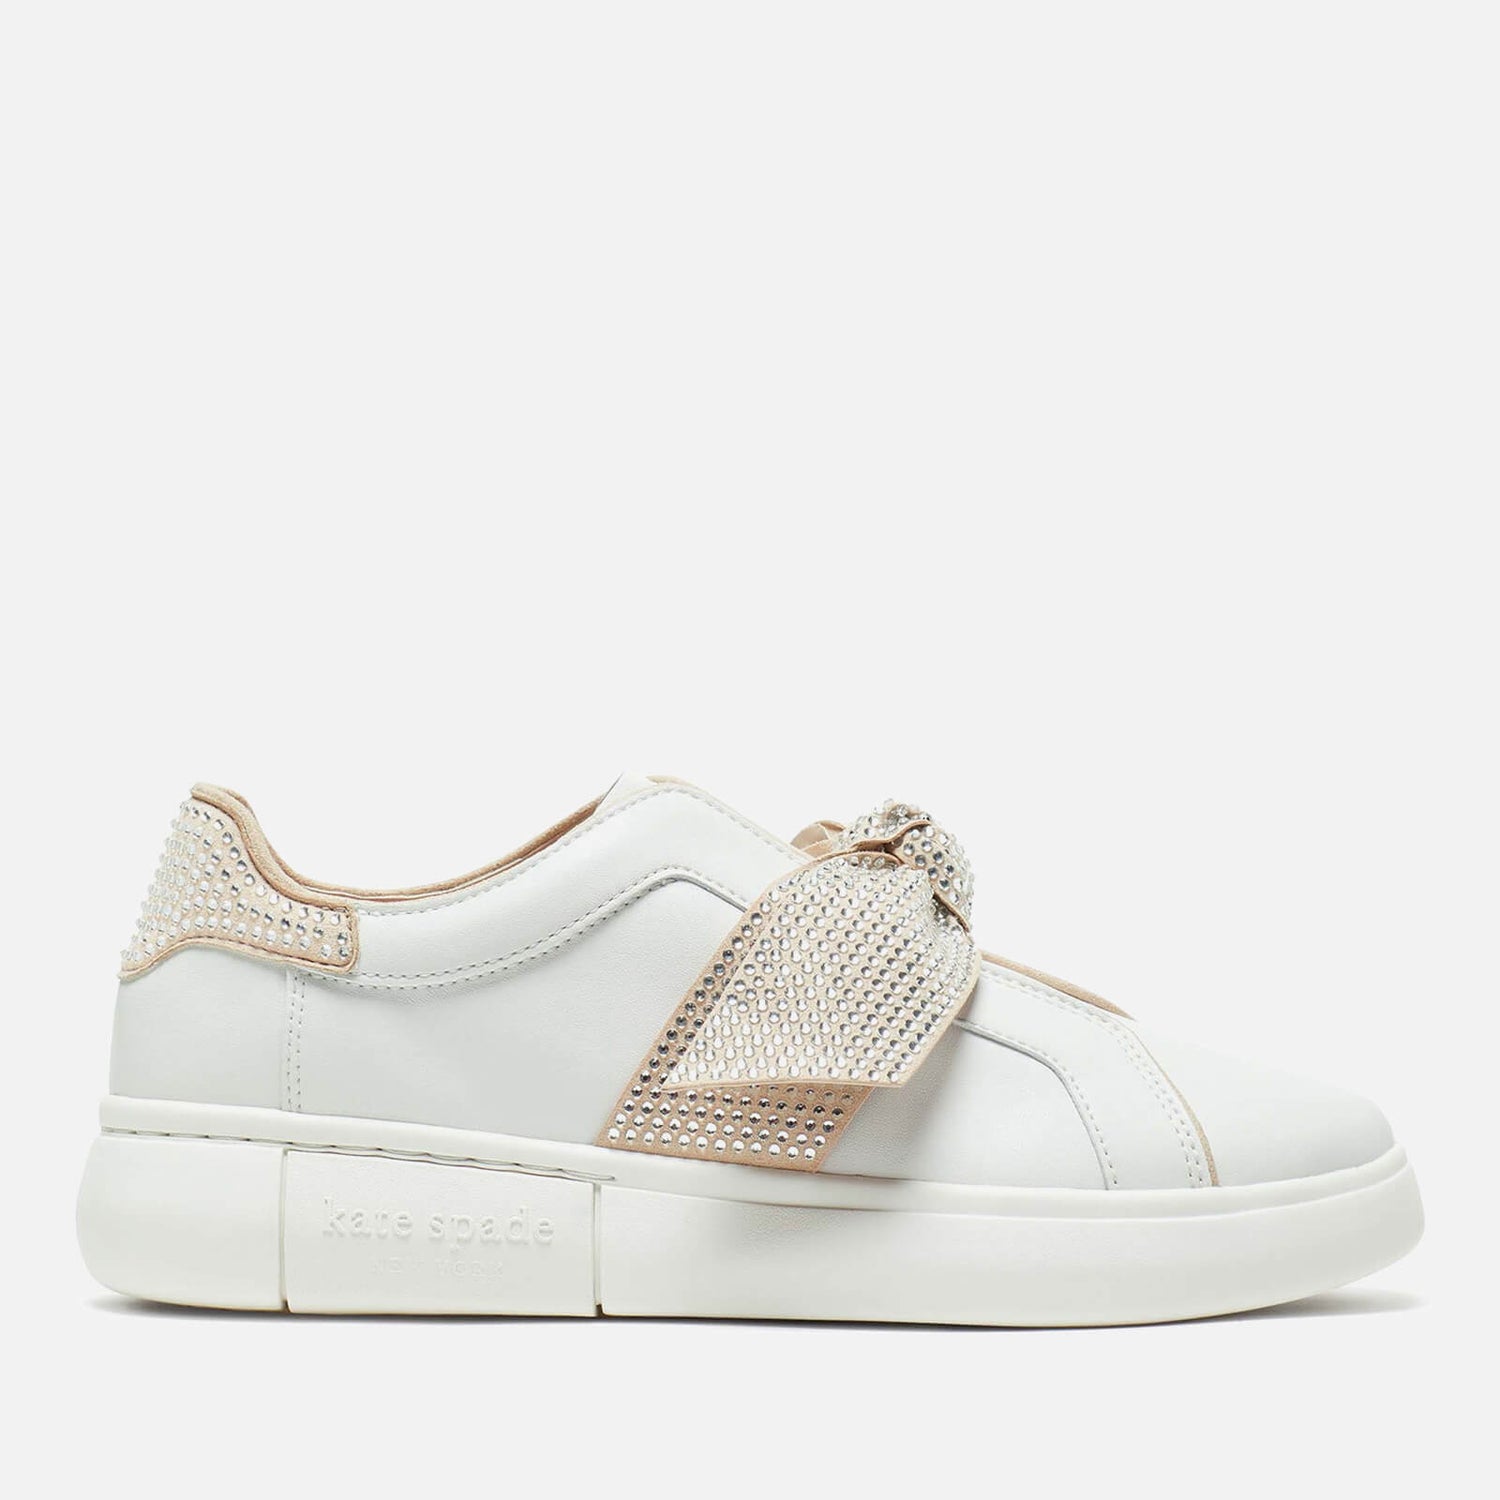 Kate Spade New York Lexi Pavé Embellished Bow Leather Trainers - UK 3